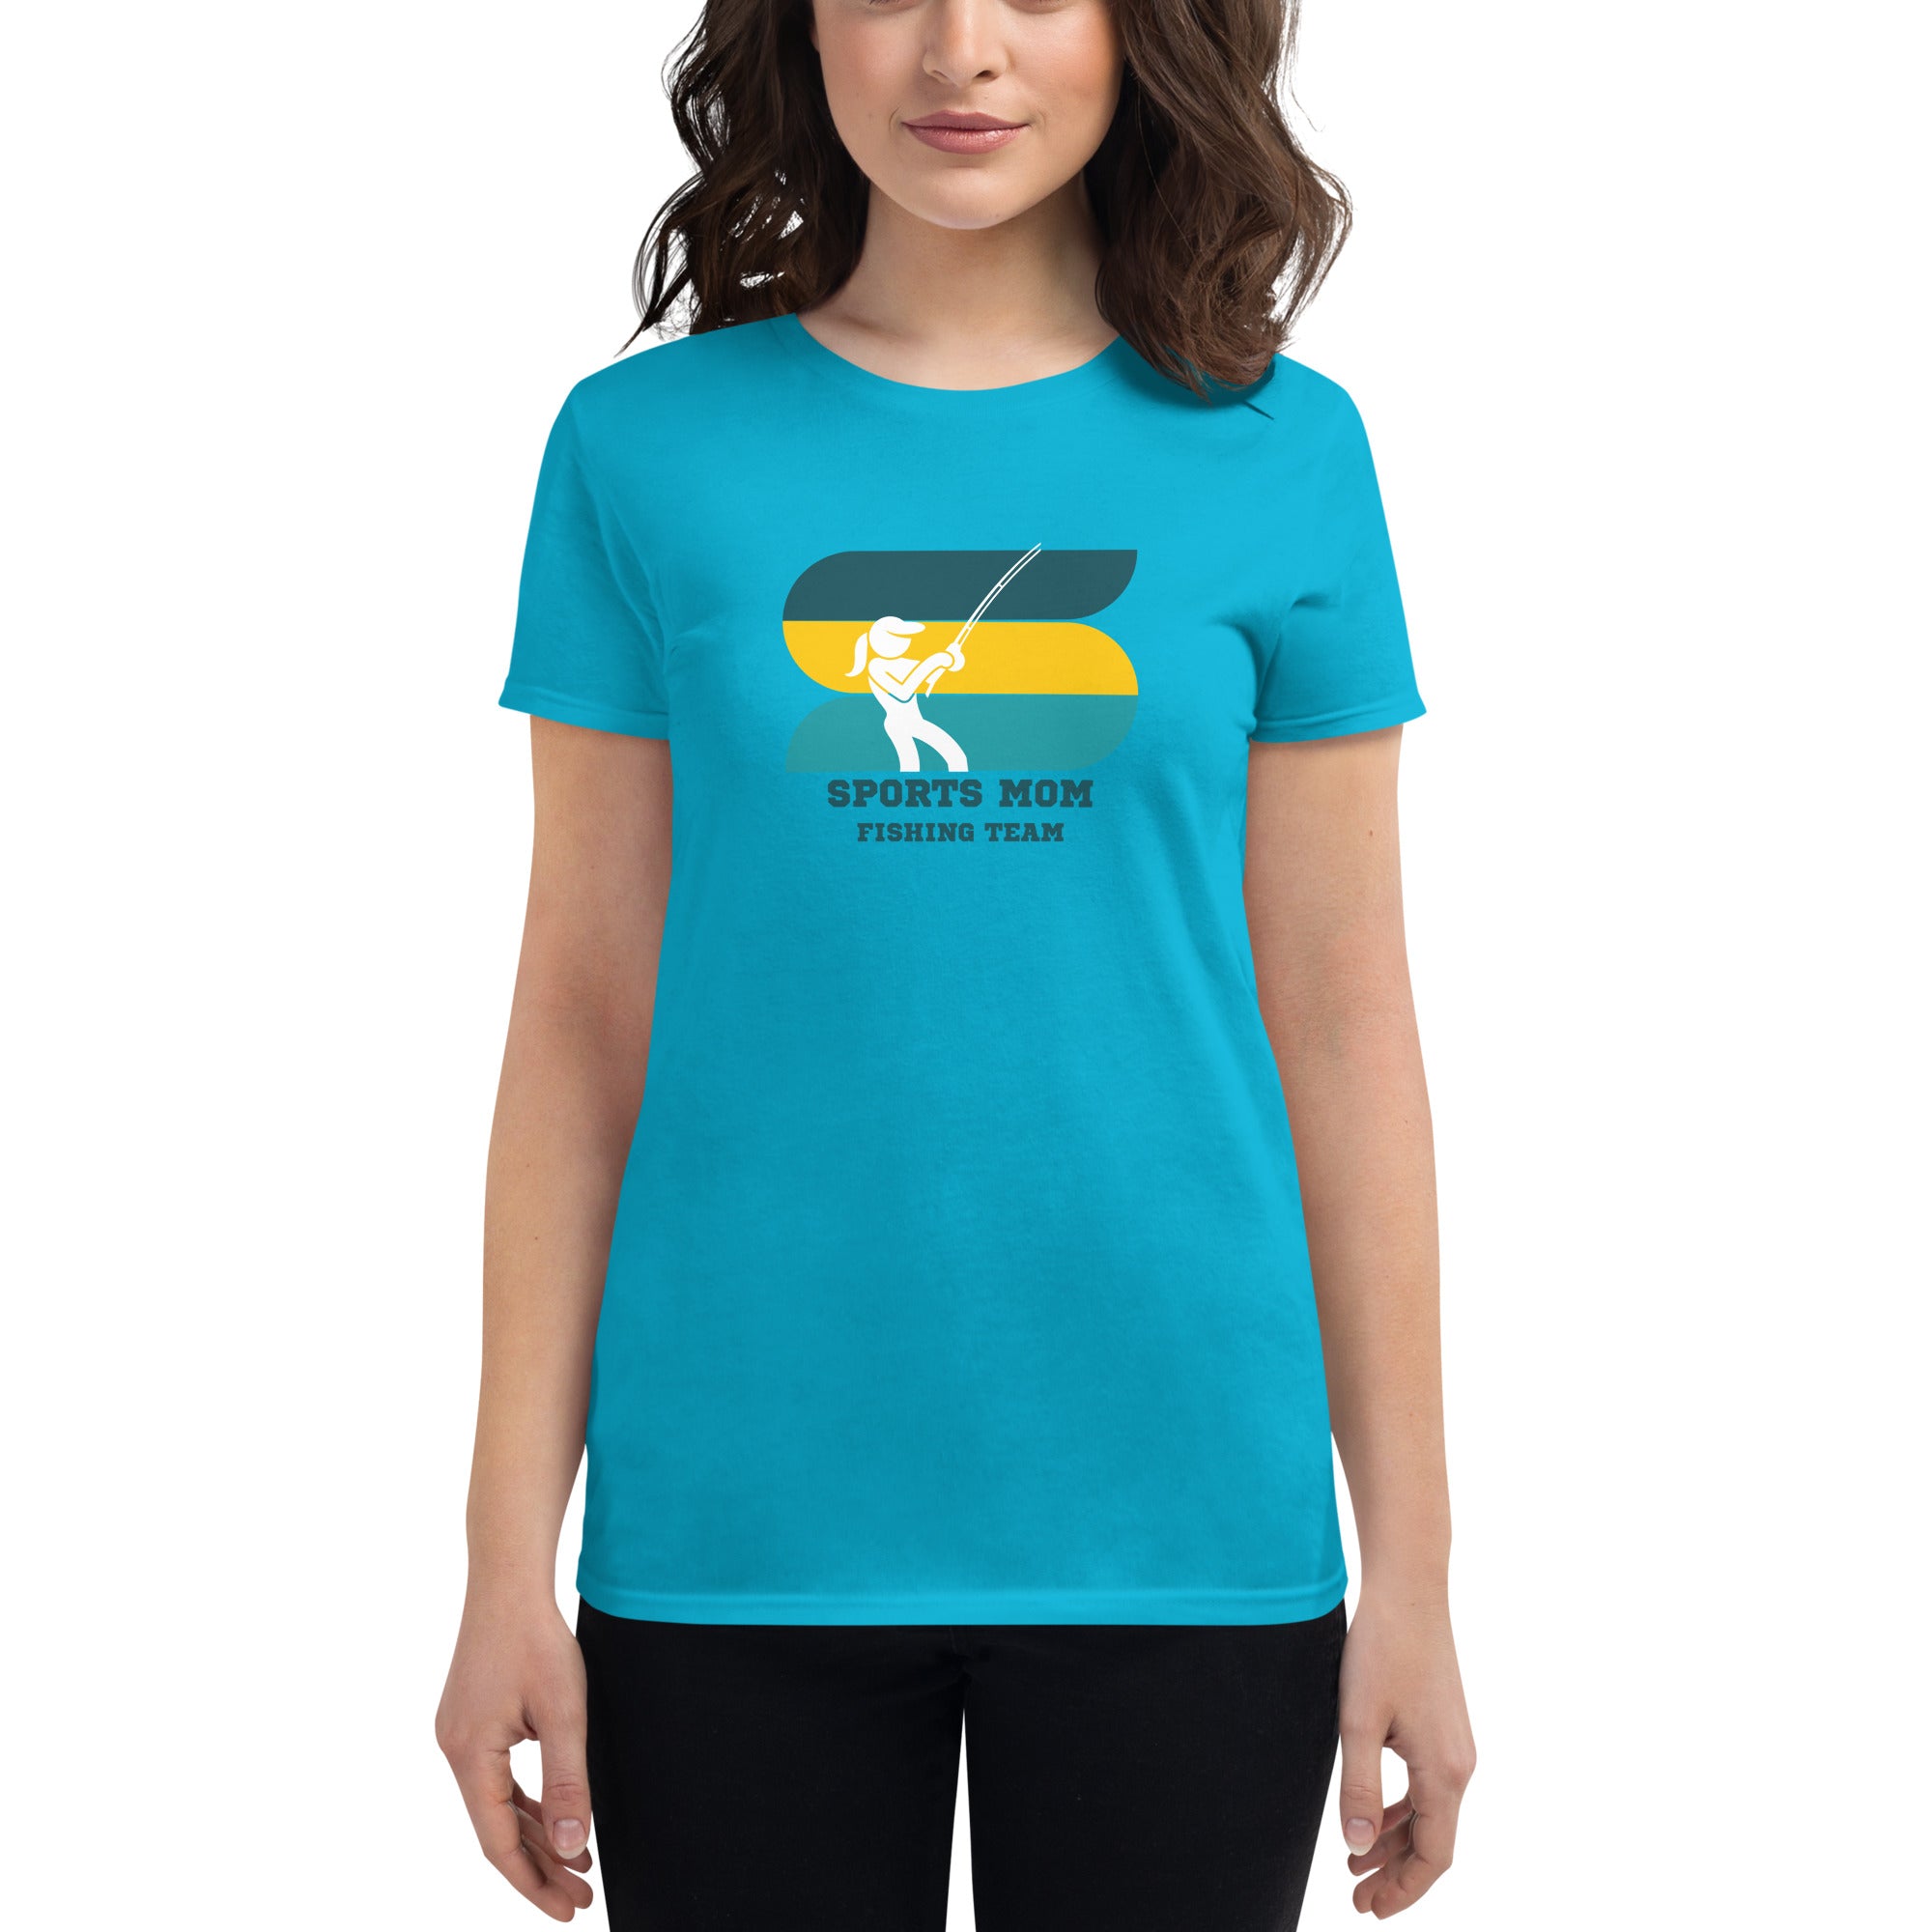 The Original Sports Mom Fishing Team Women's Fitted T-Shirt